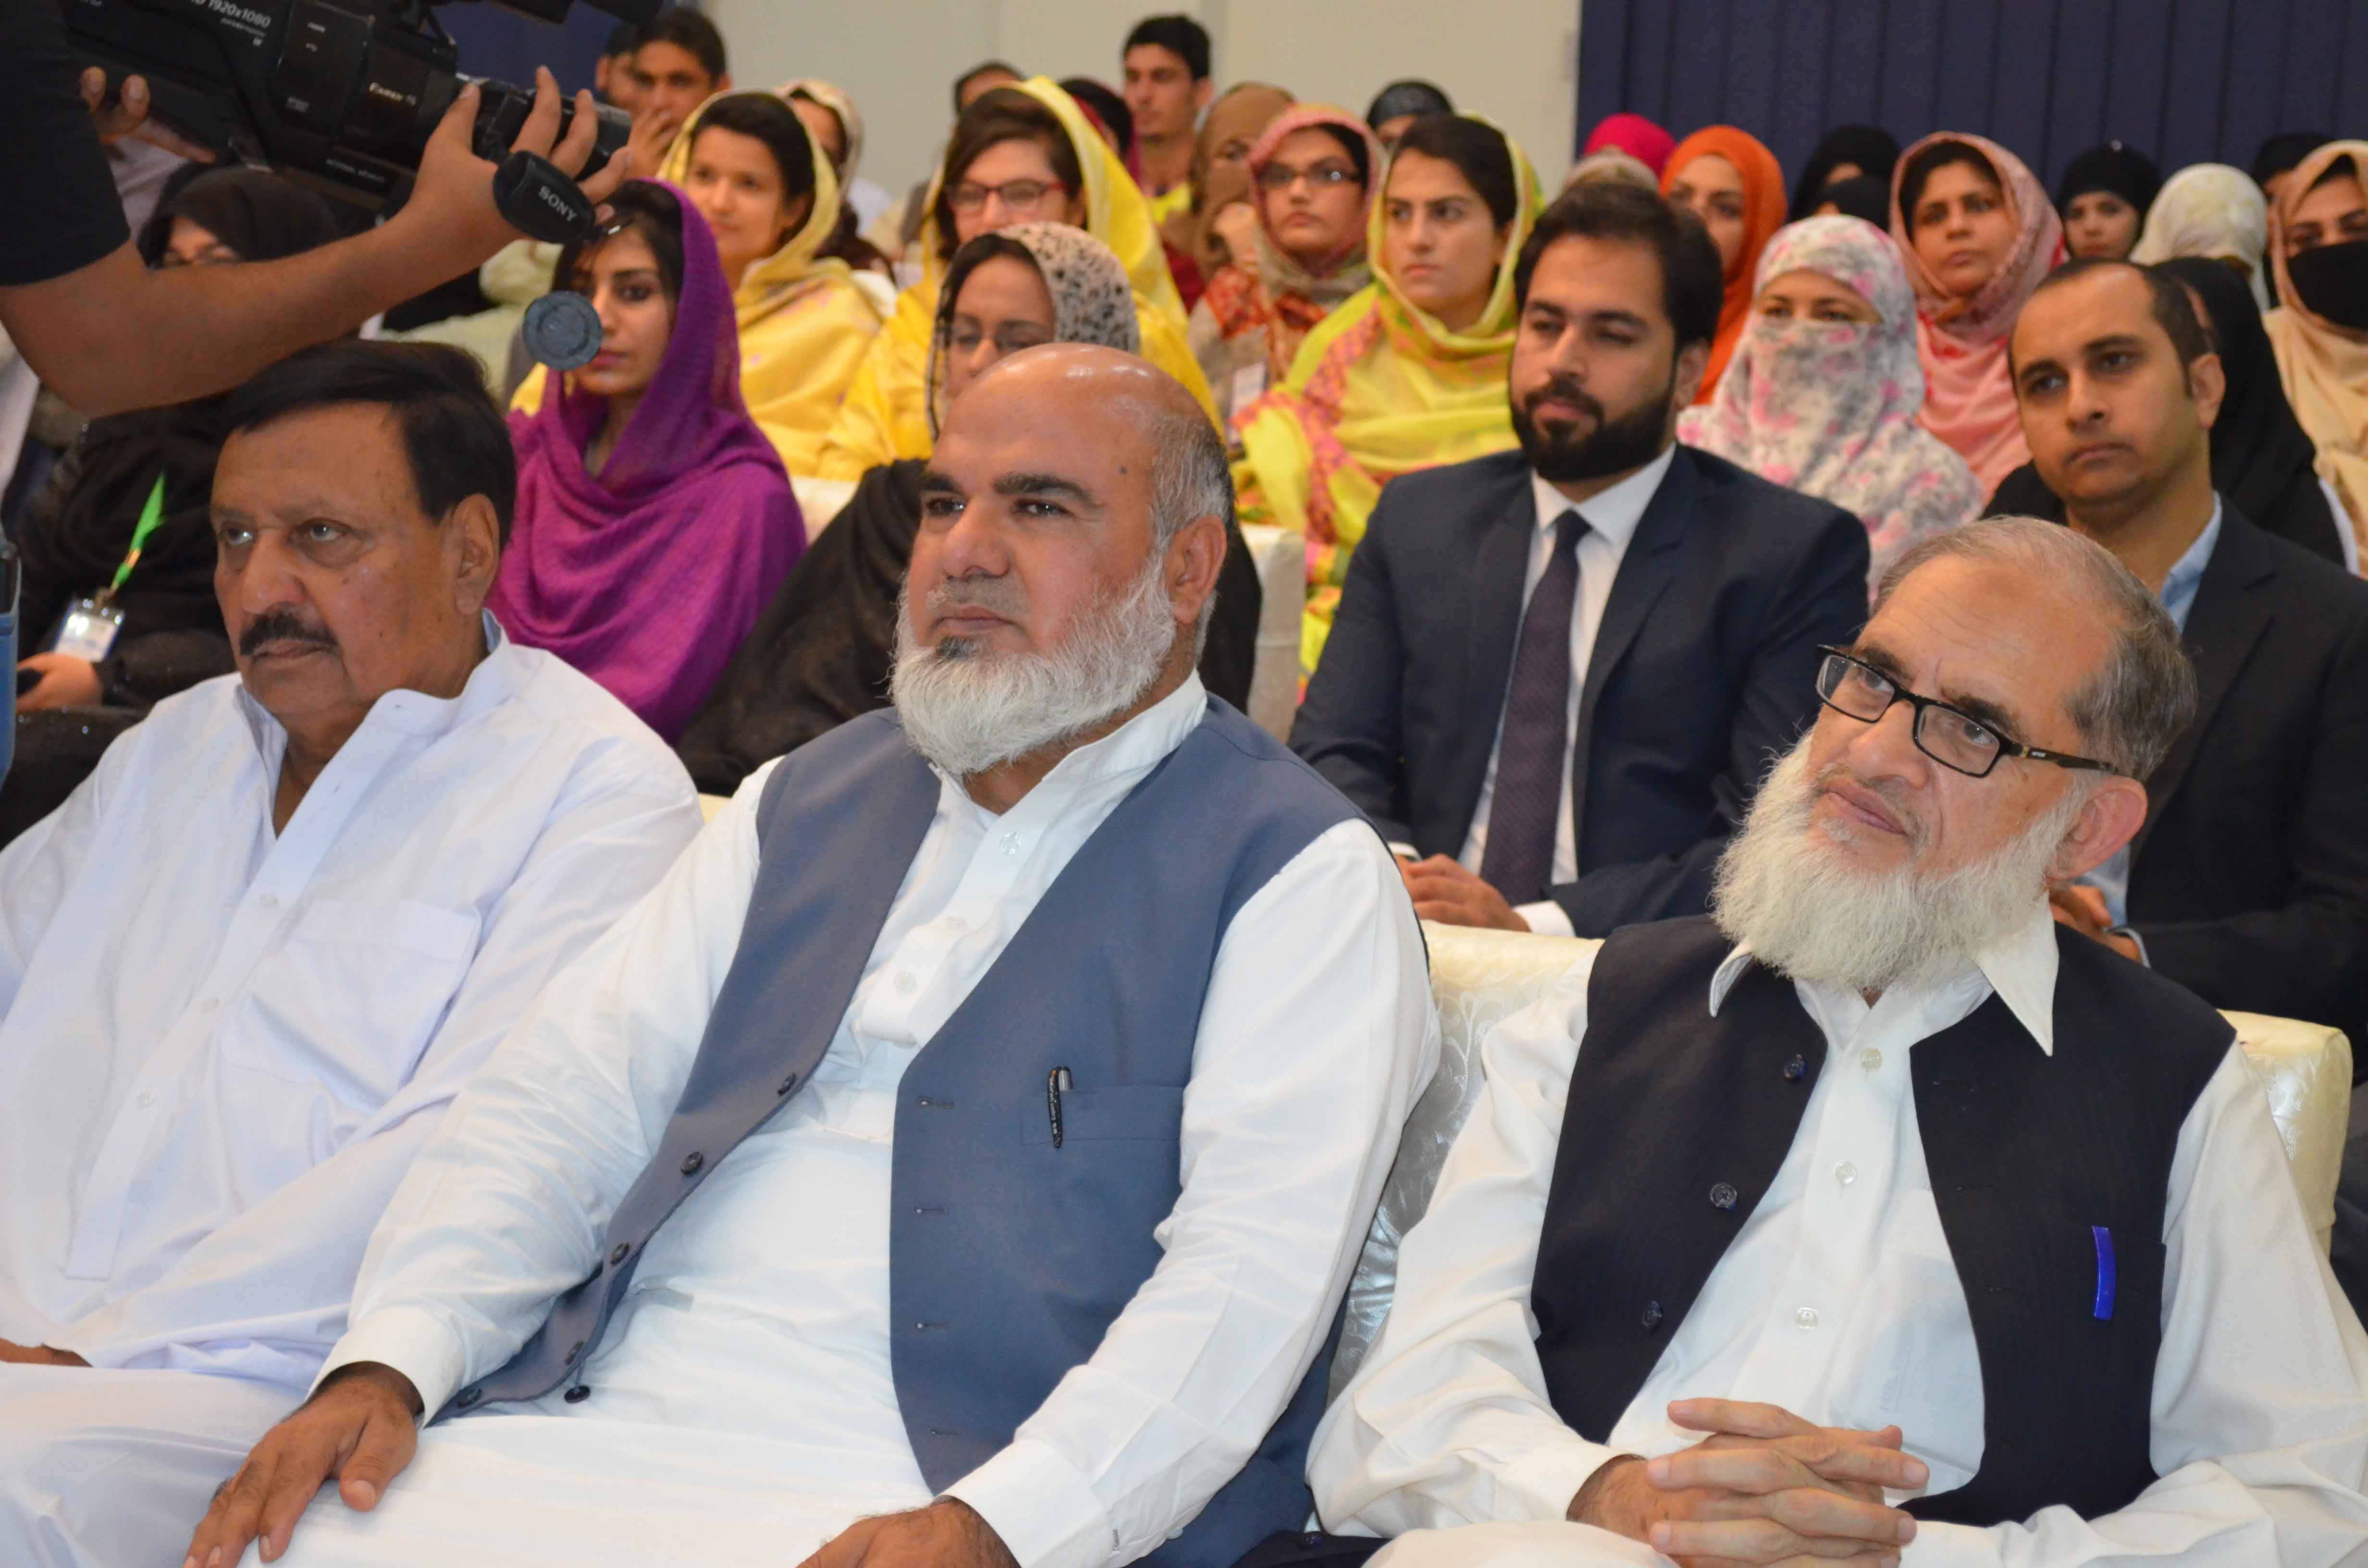 Honorable guests are listening the speech by different scholars at the conference